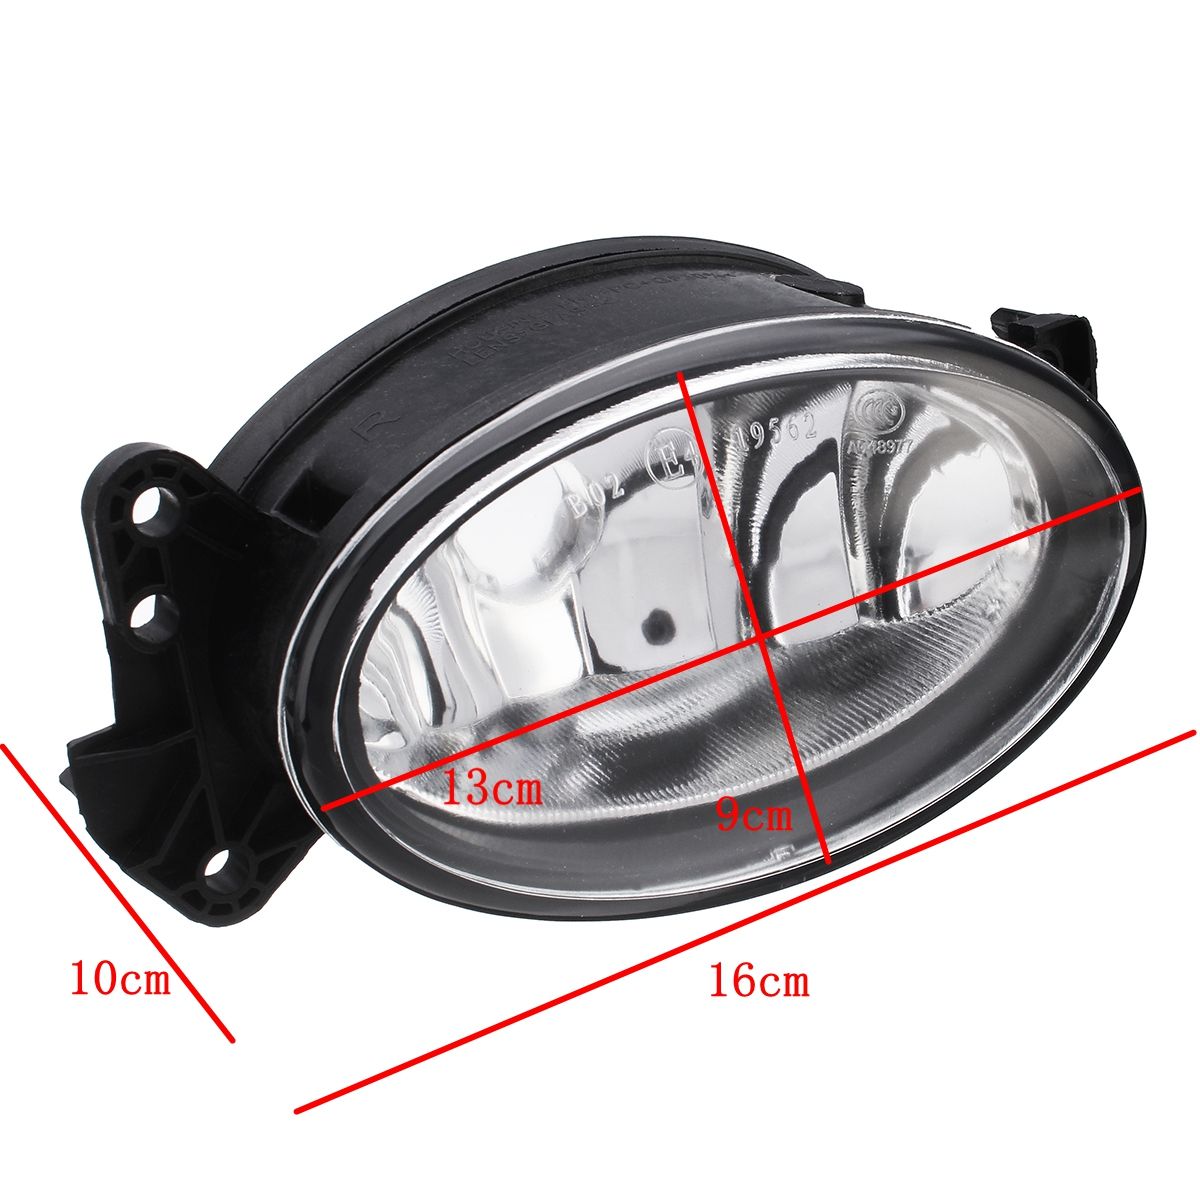 Car-Front-Bumper-Halogen-Fog-Lights-with-No-Bulbs-Pair-for-Benz-W211-W204-W219-W164-1698201556-16982-1525332